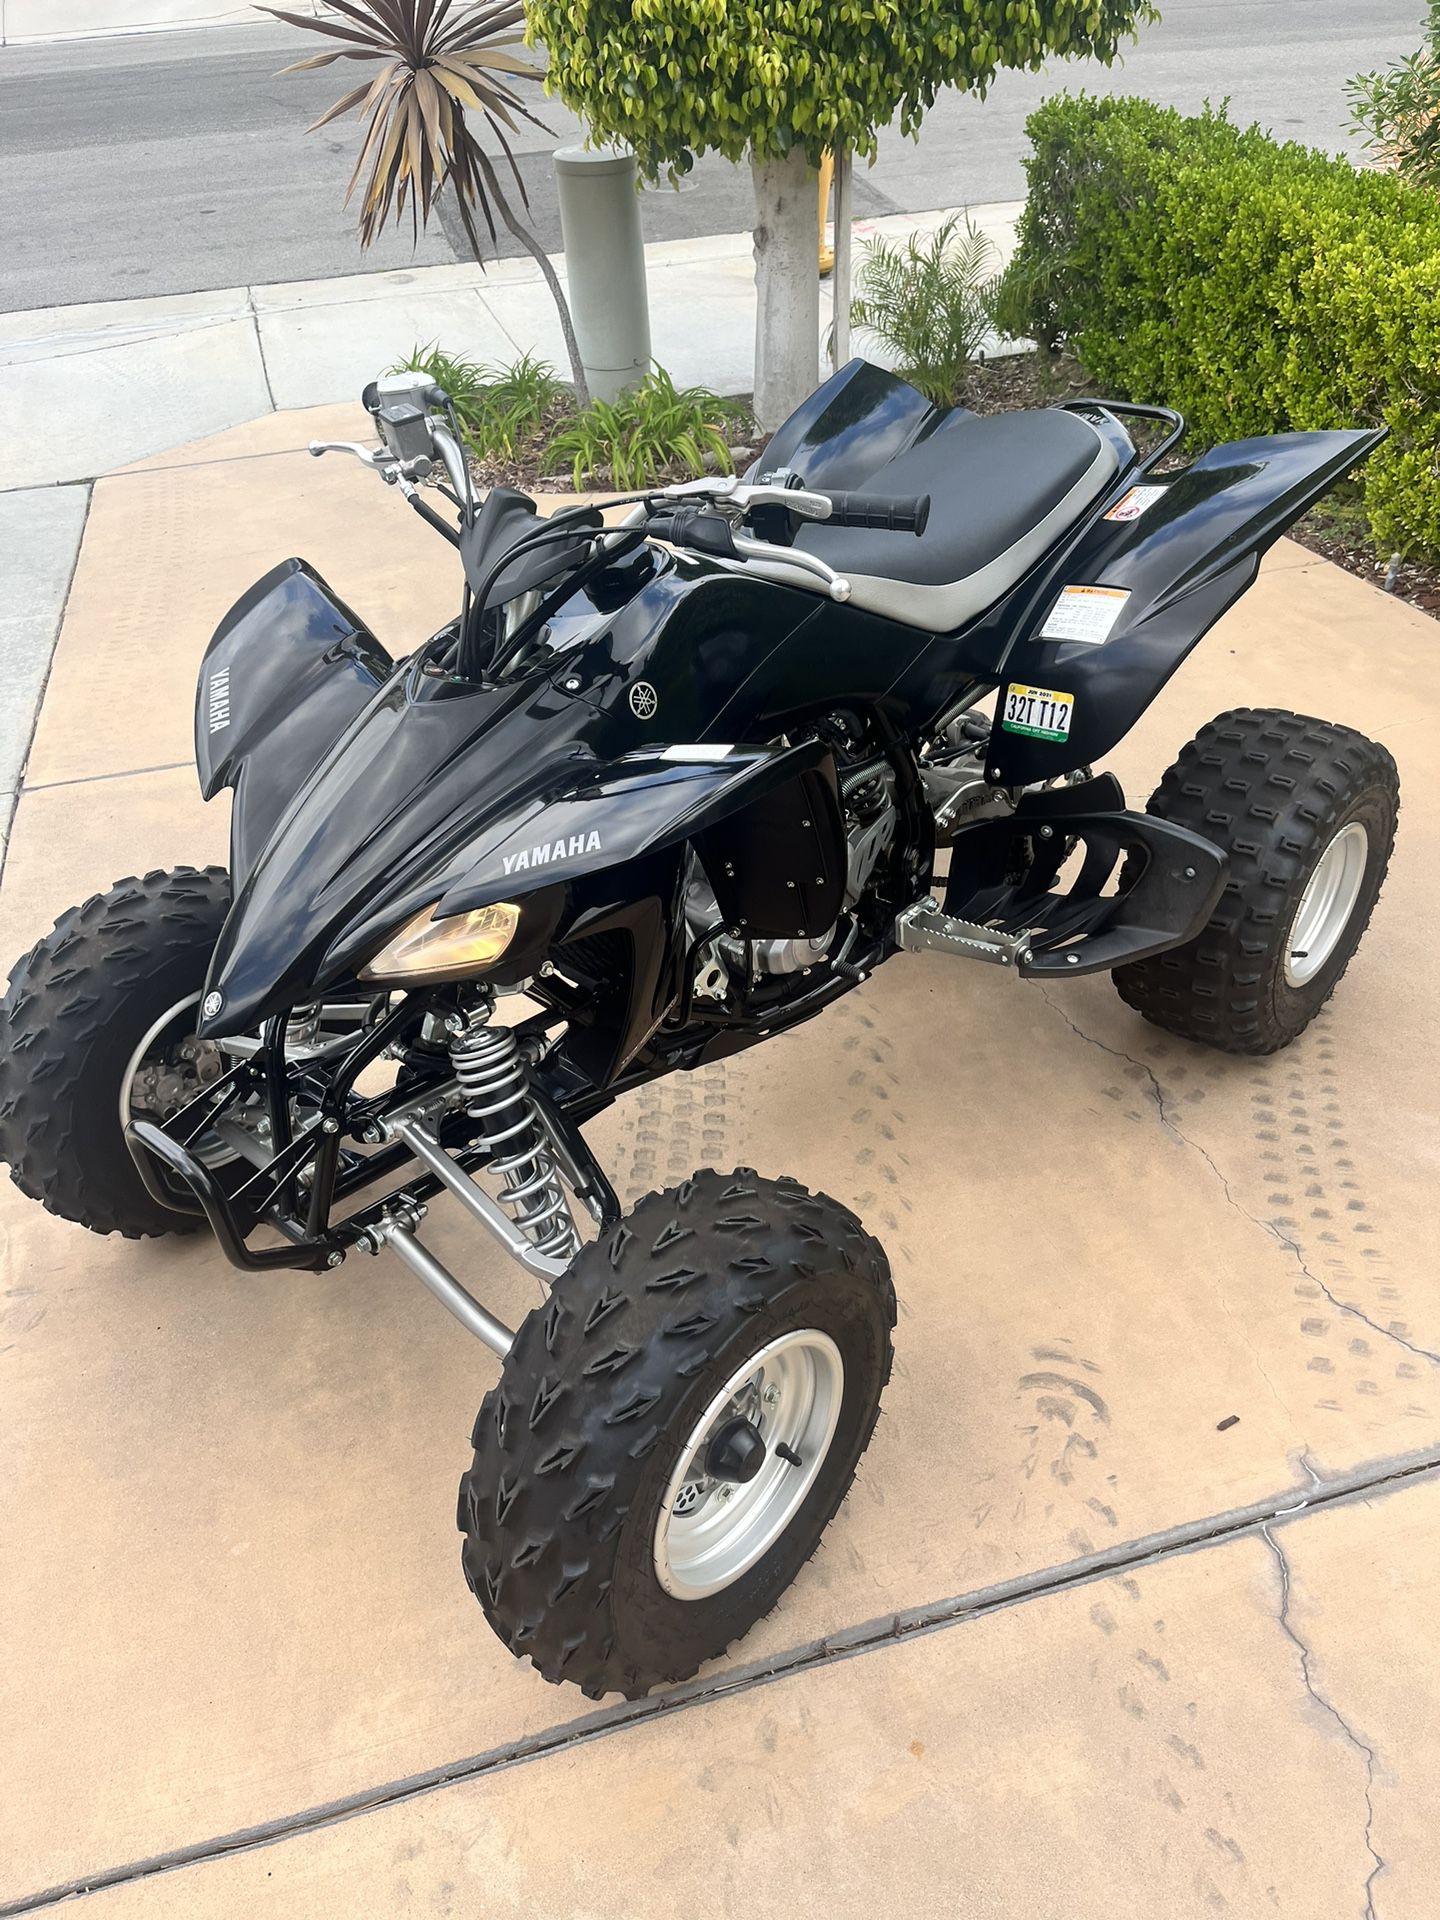 2013 Yamaha YFZ 450 In Excellent Condition. 